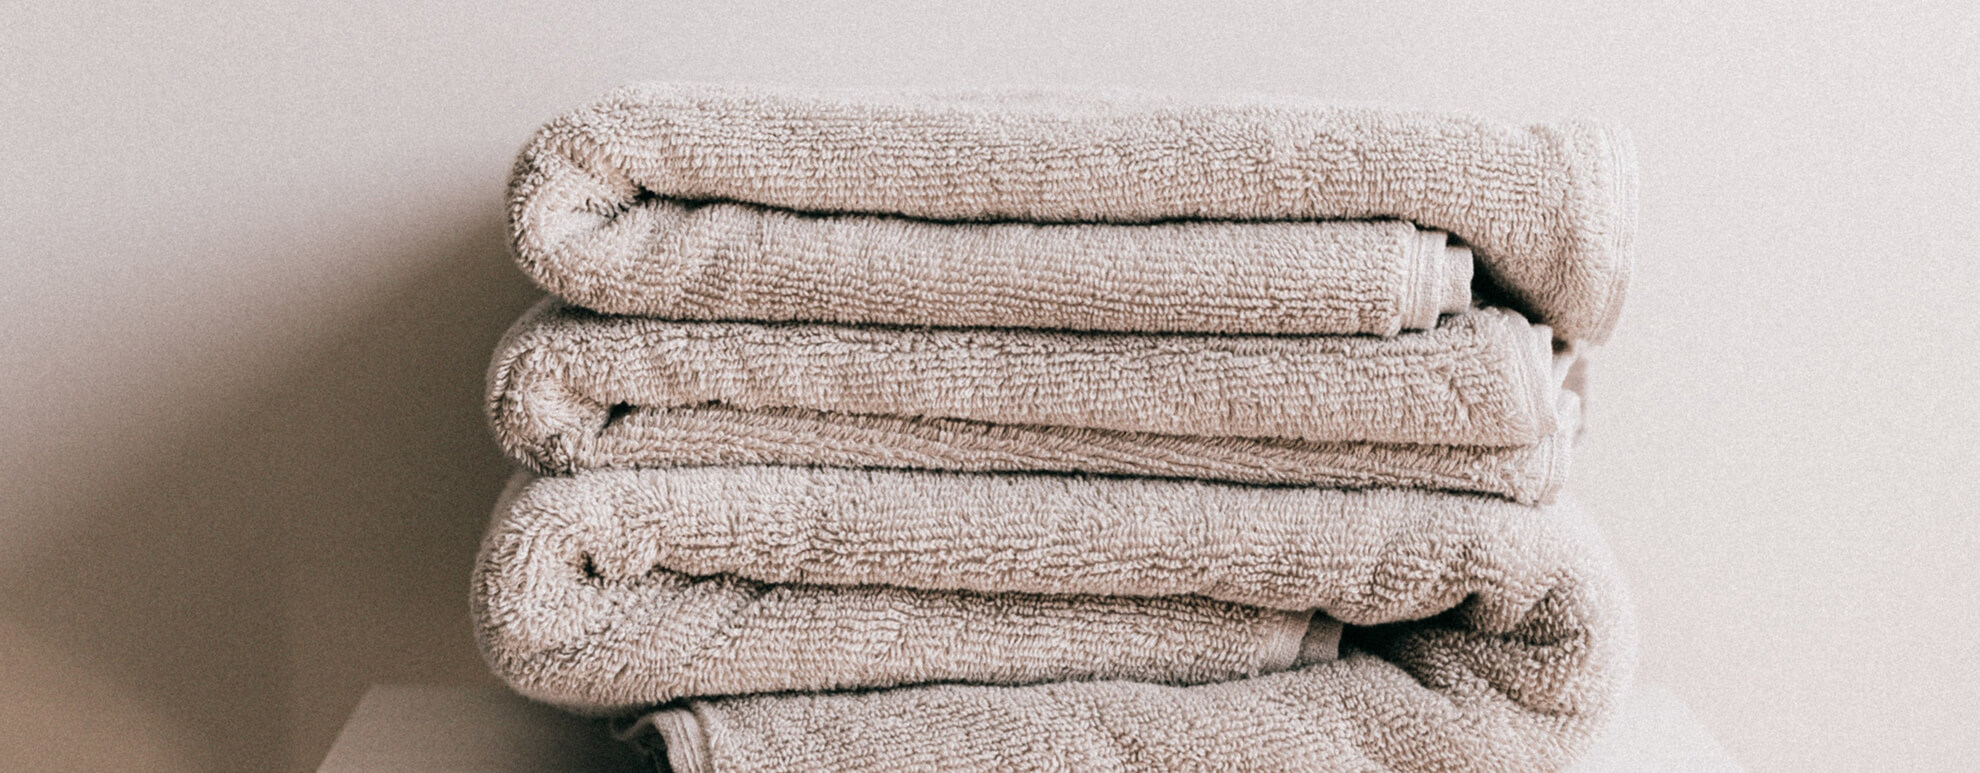 Old towels and linen